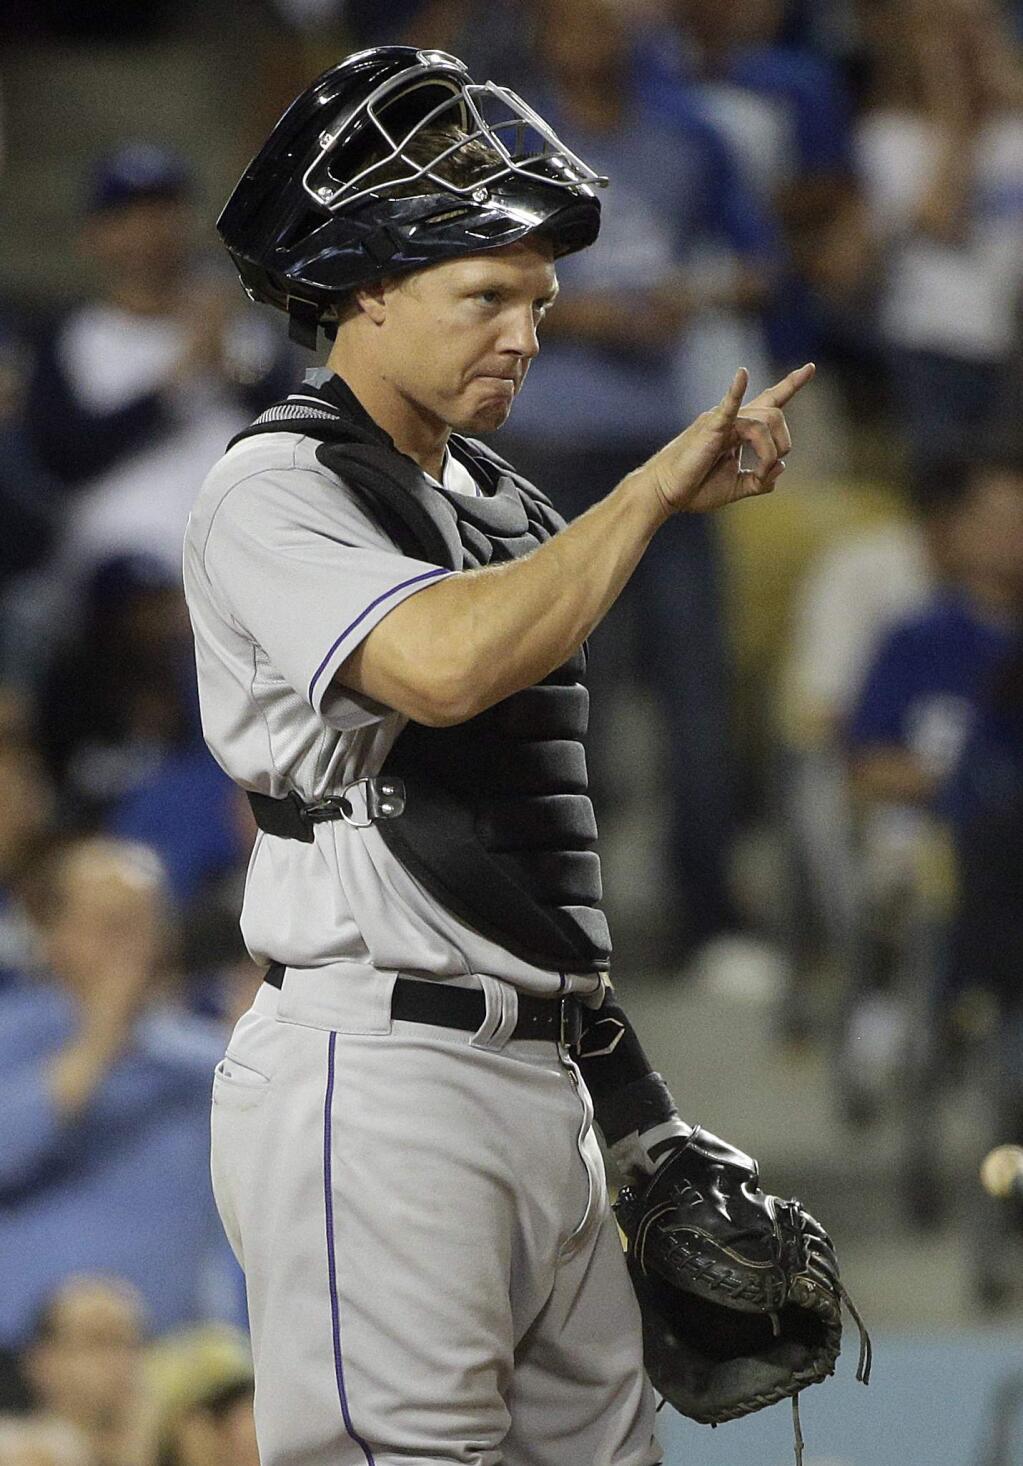 In this April 17, 2015, file photo, Colorado Rockies catcher Nick Hundley signals to starting pitcher Christian Friedrich during the seventh inning against the Los Angeles Dodgers in Los Angeles. (AP Photo/Jae C. Hong, File)